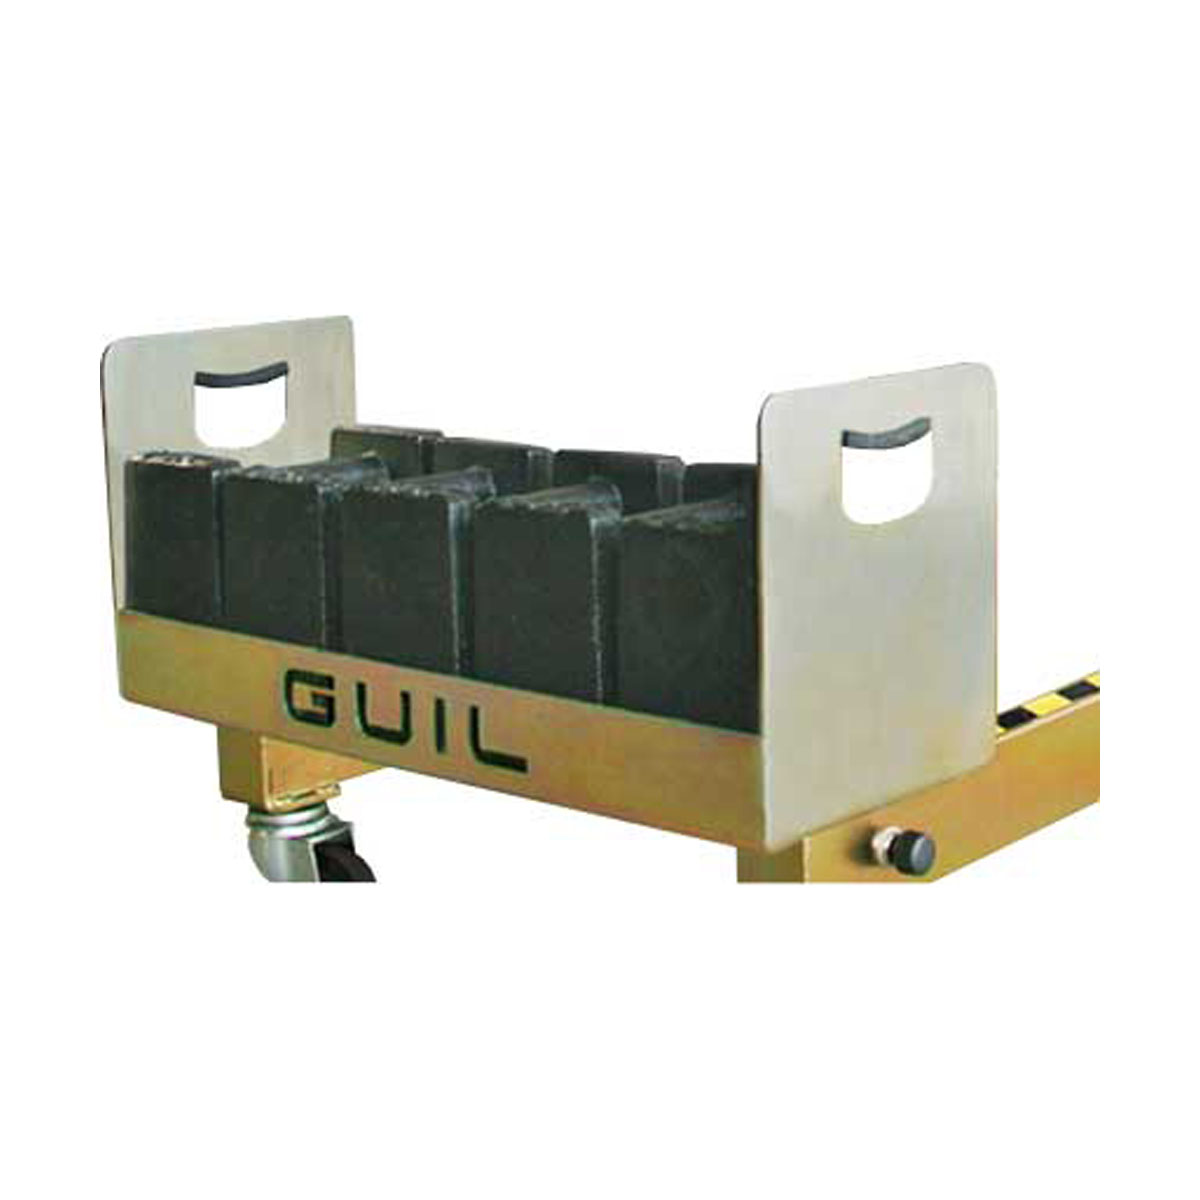 Buy Material Lifter Counterweight Unit available at Astrolift NZ